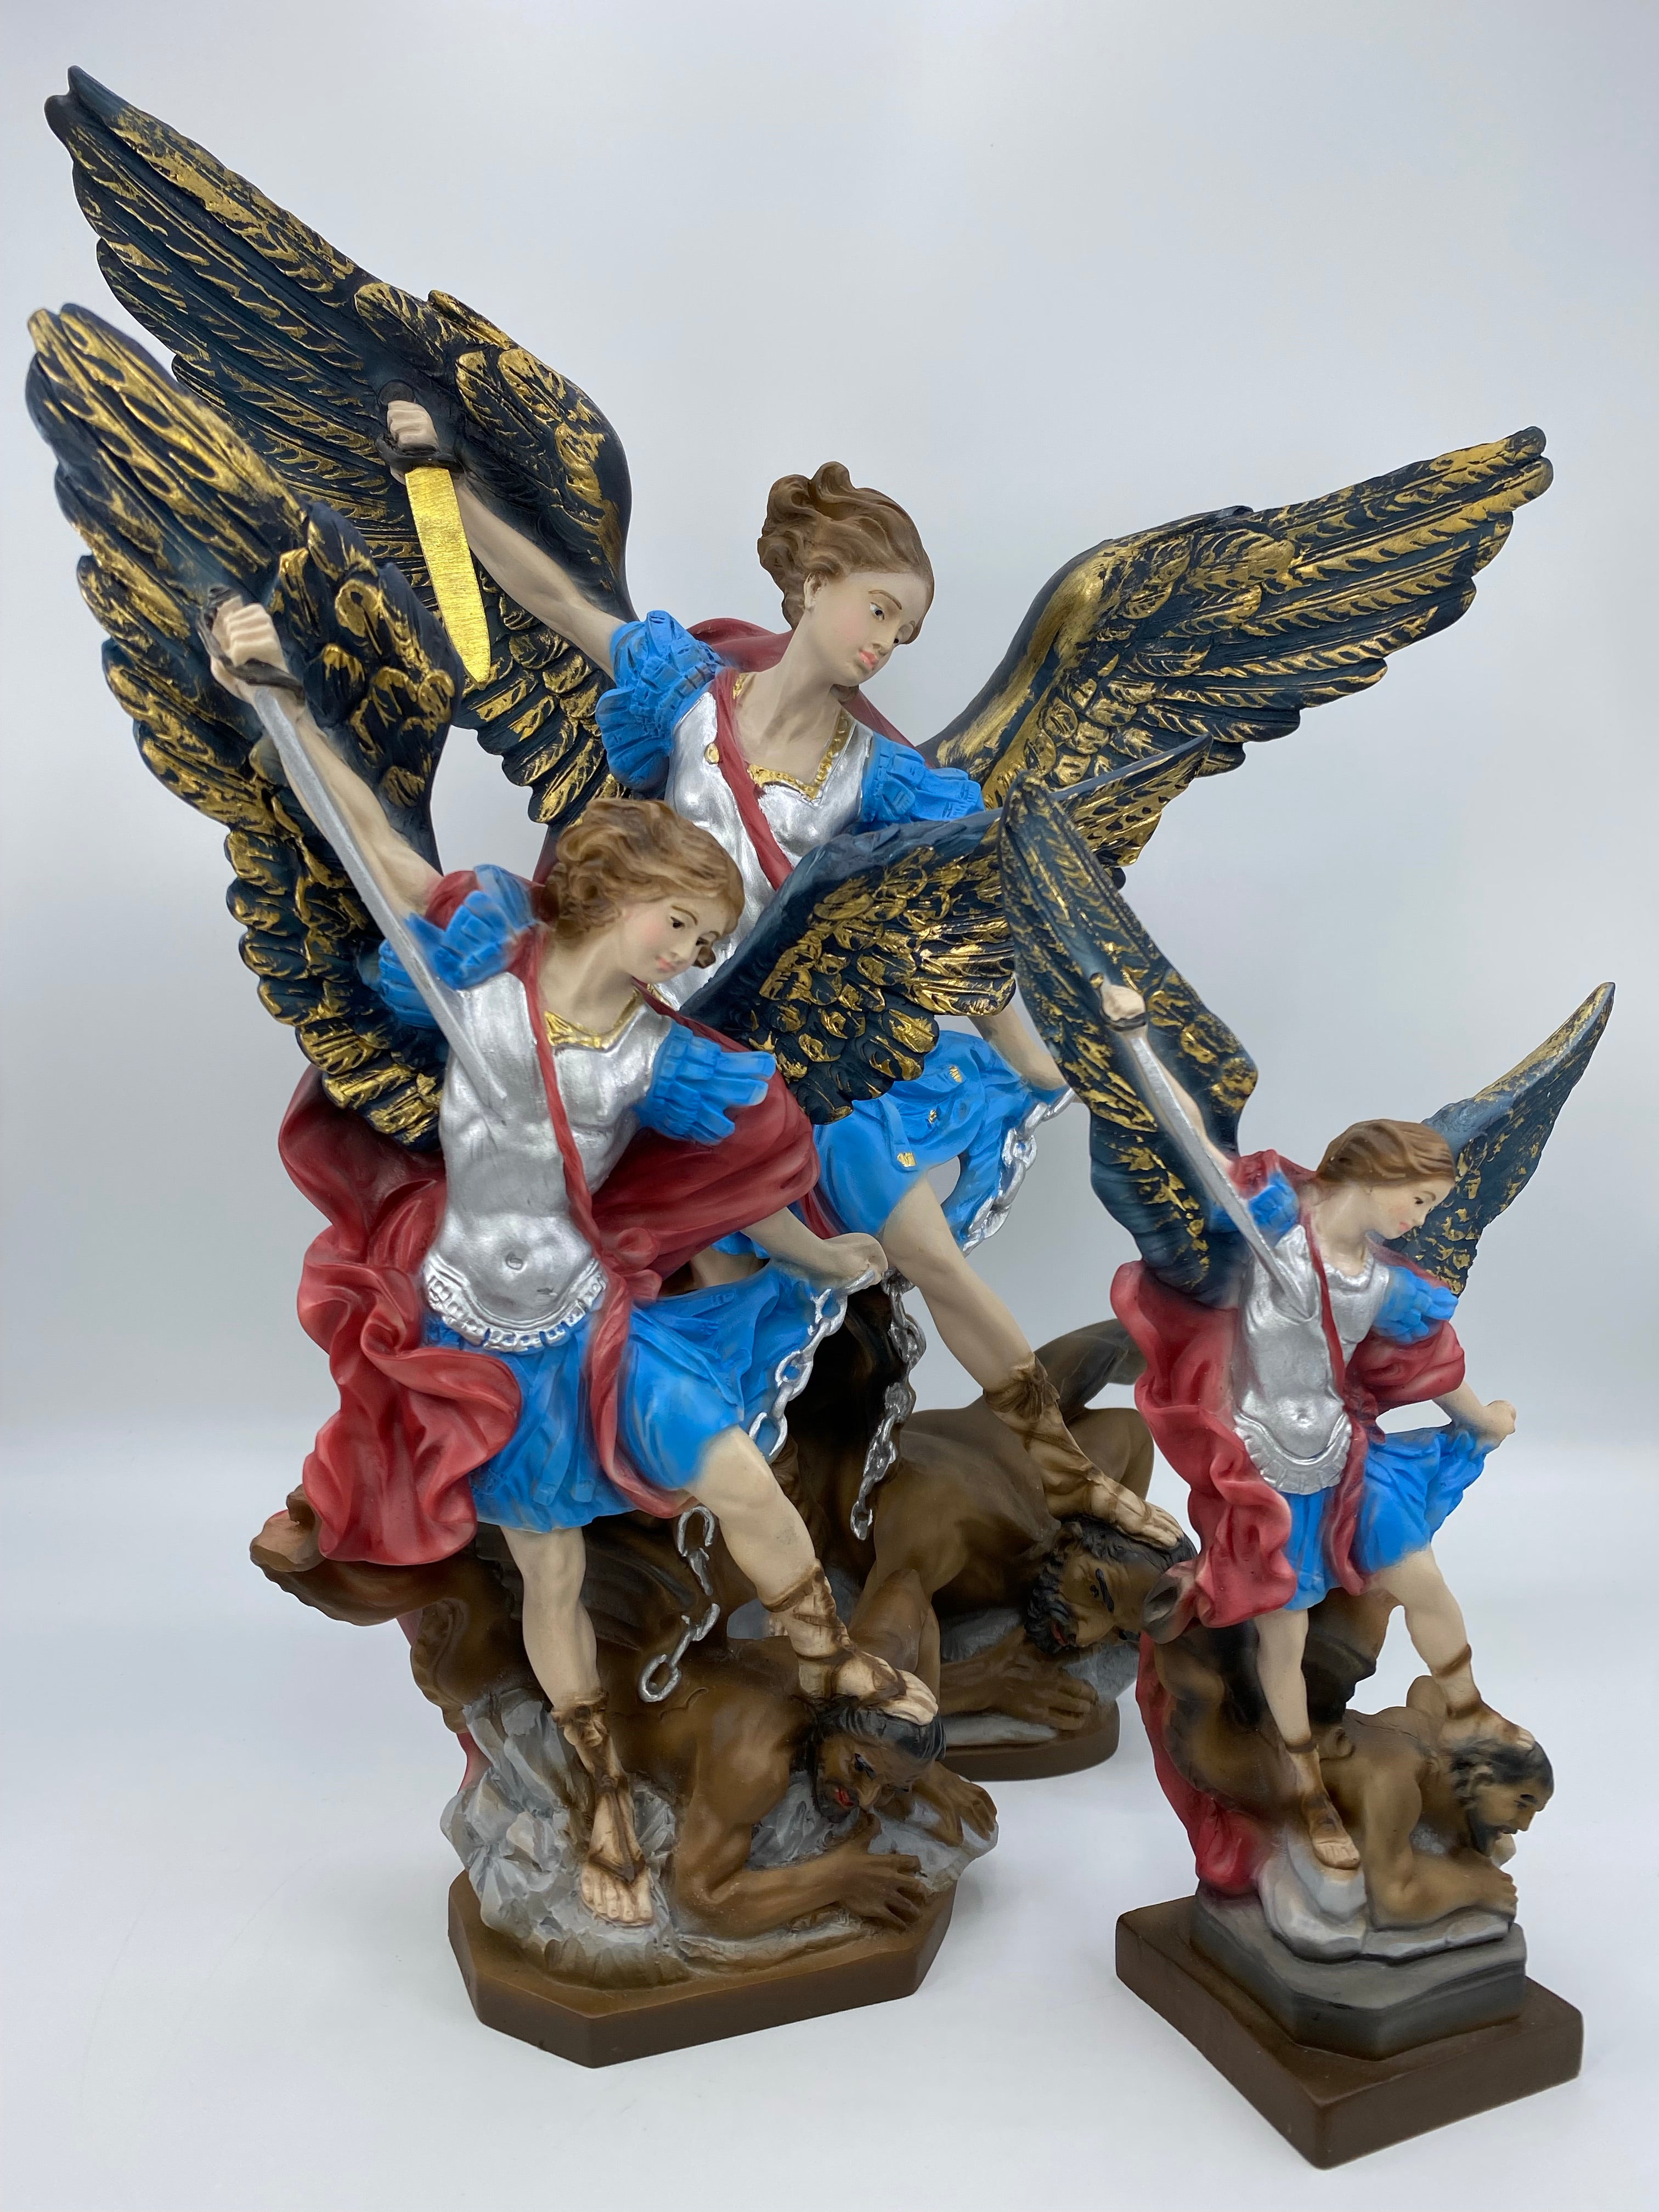 The Faith Gift Shop Saint Michael The Archangel Navy Blue & Gold Wings statue - Hand Painted in Italy - Our Tuscany Collection - Estatua de San Miguel Archangel